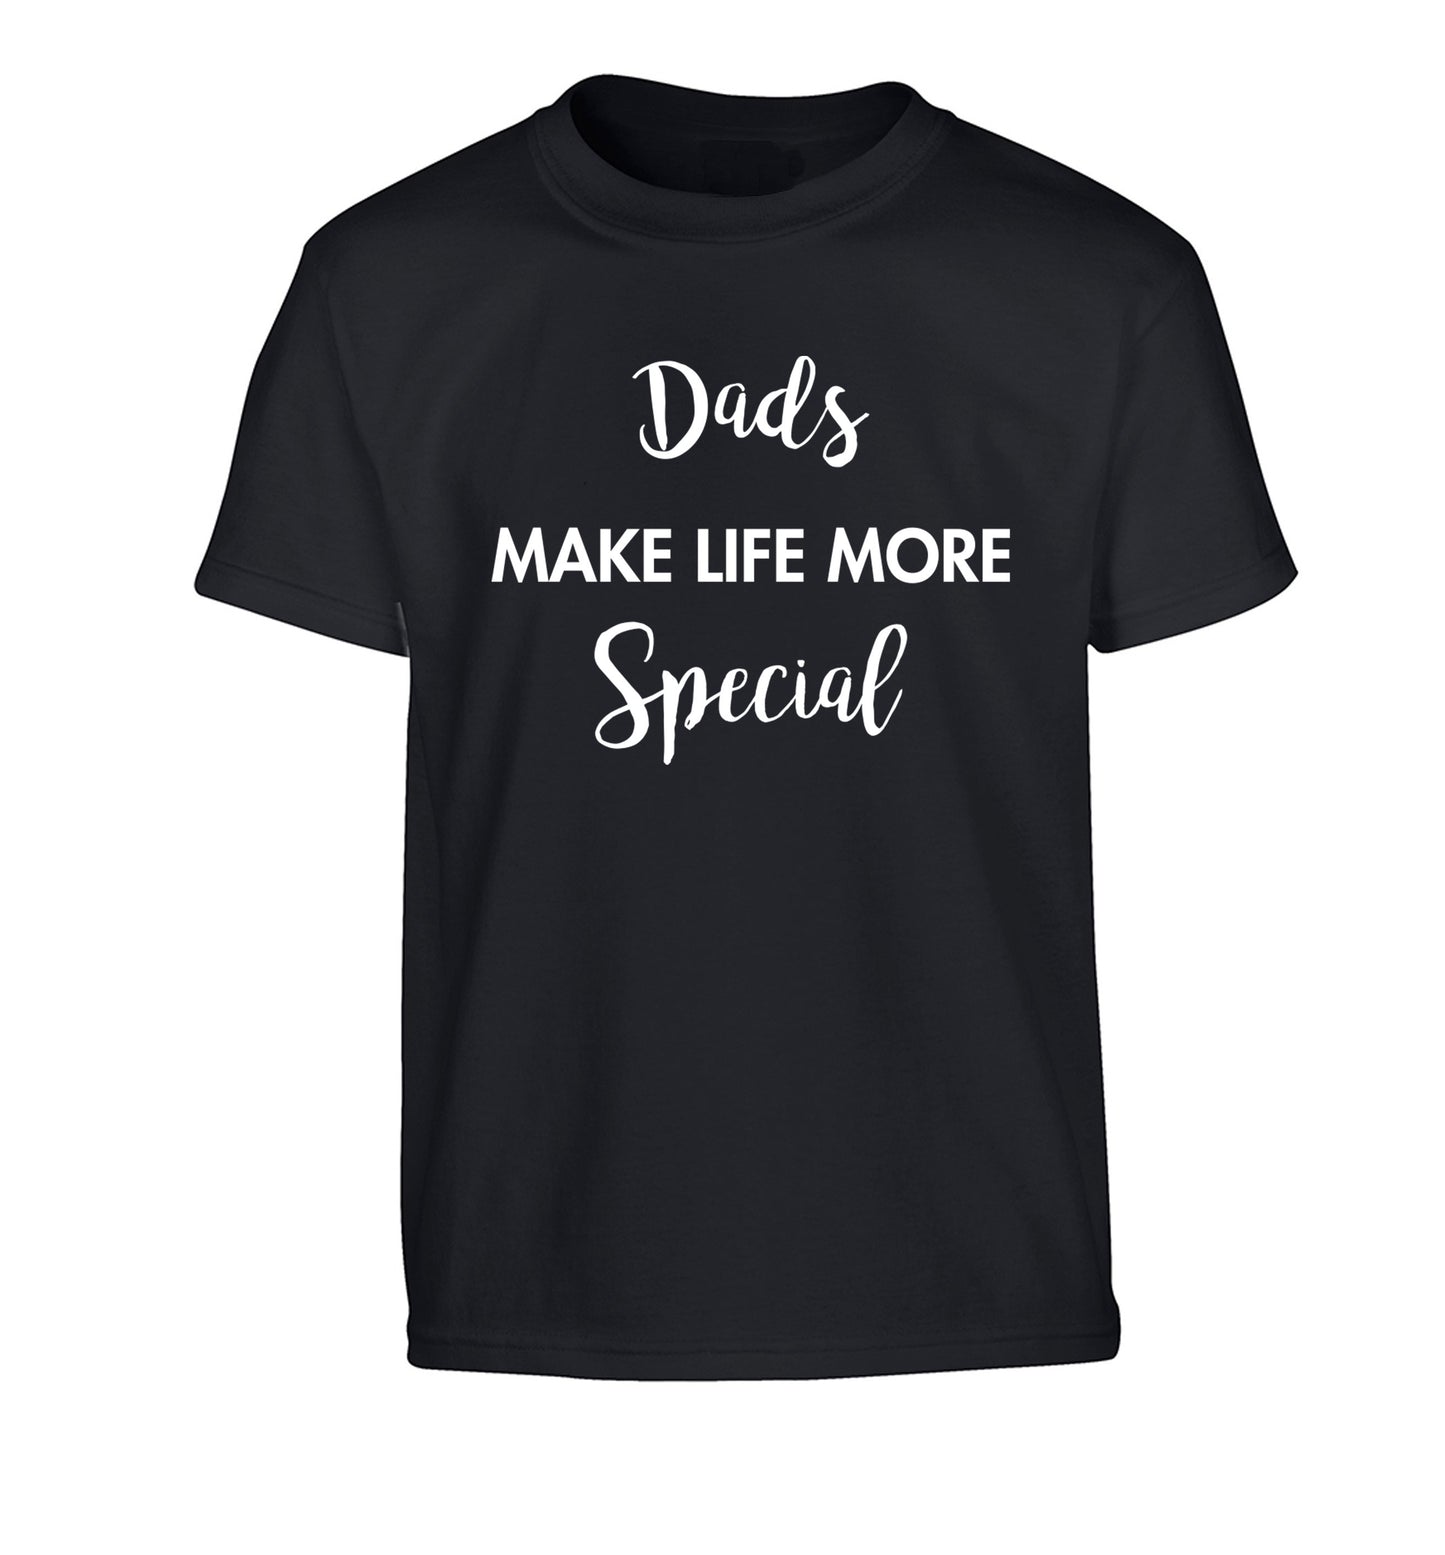 Dads make life more special Children's black Tshirt 12-14 Years